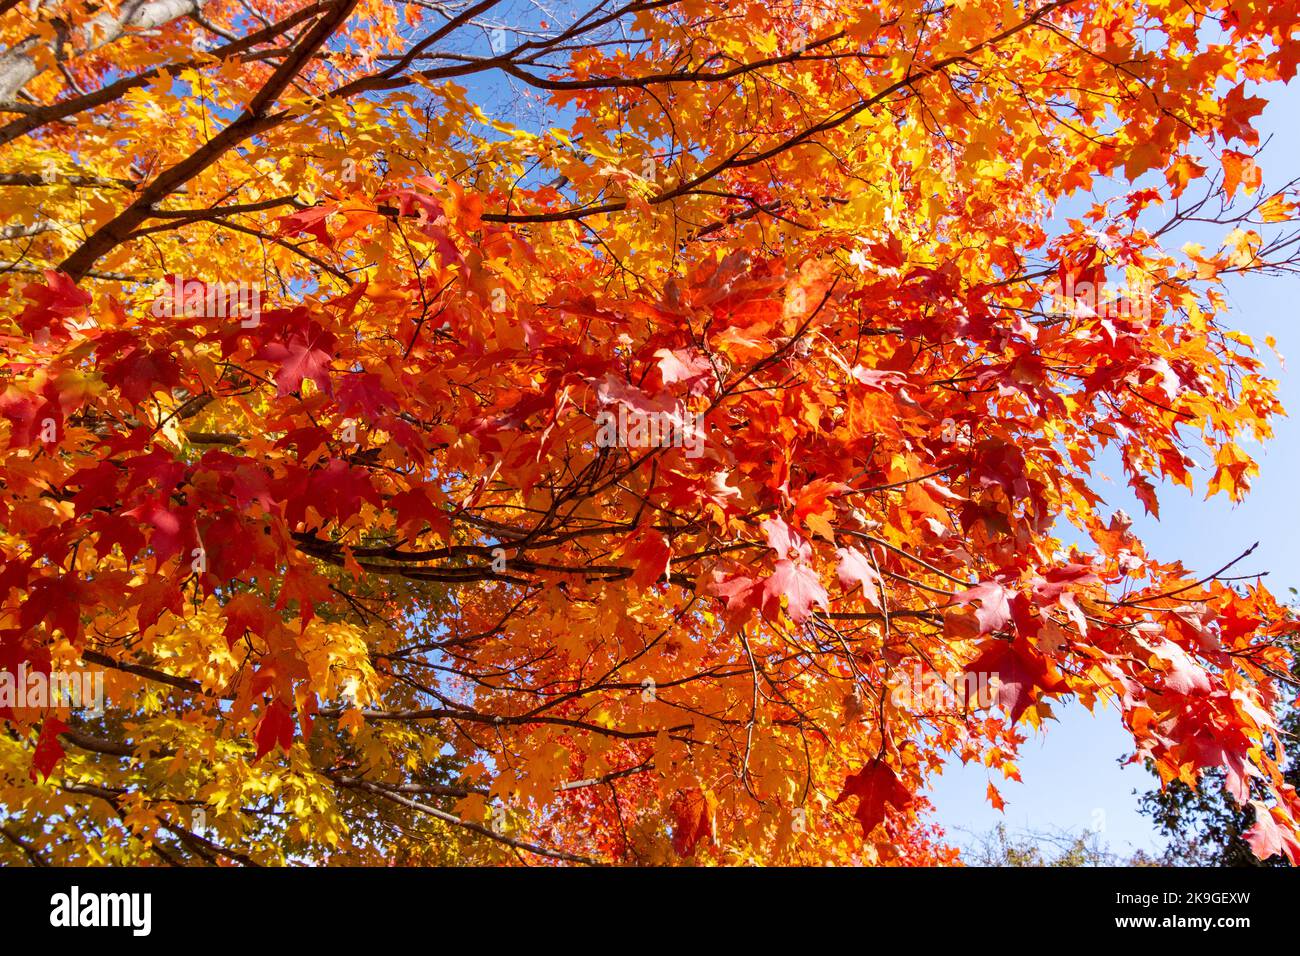 Looking up into maple trees in full fall foliage. Bright sunny day. Stock Photo